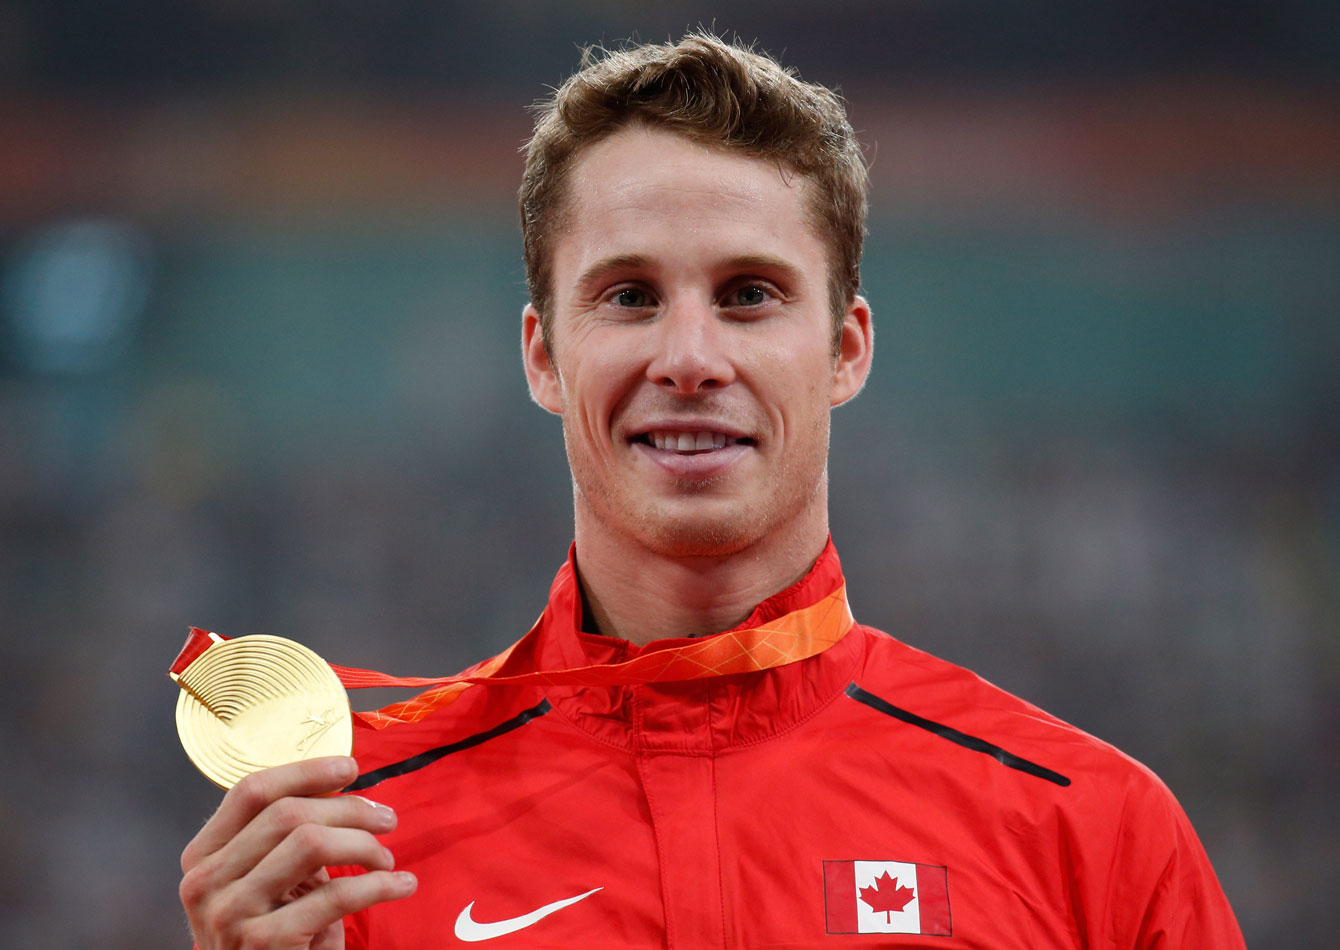 High jumper Derek Drouin holds up his gold medal at the IAAF World Championships in Athletics on August 30, 2015. 